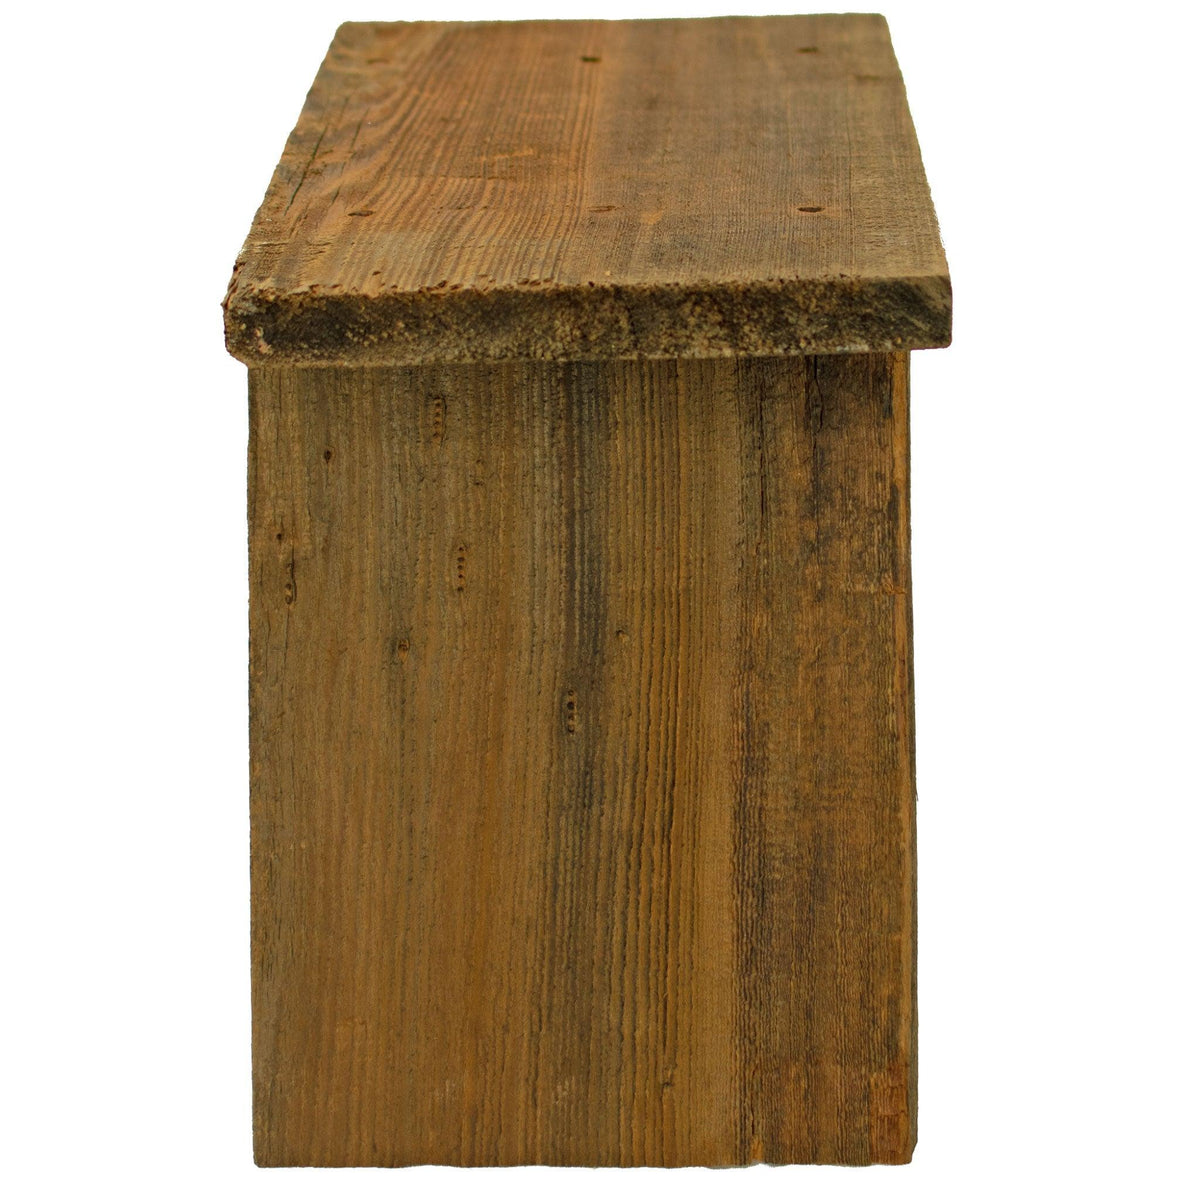 Side Angle of Lee Display's Redwood Build-Up End Table